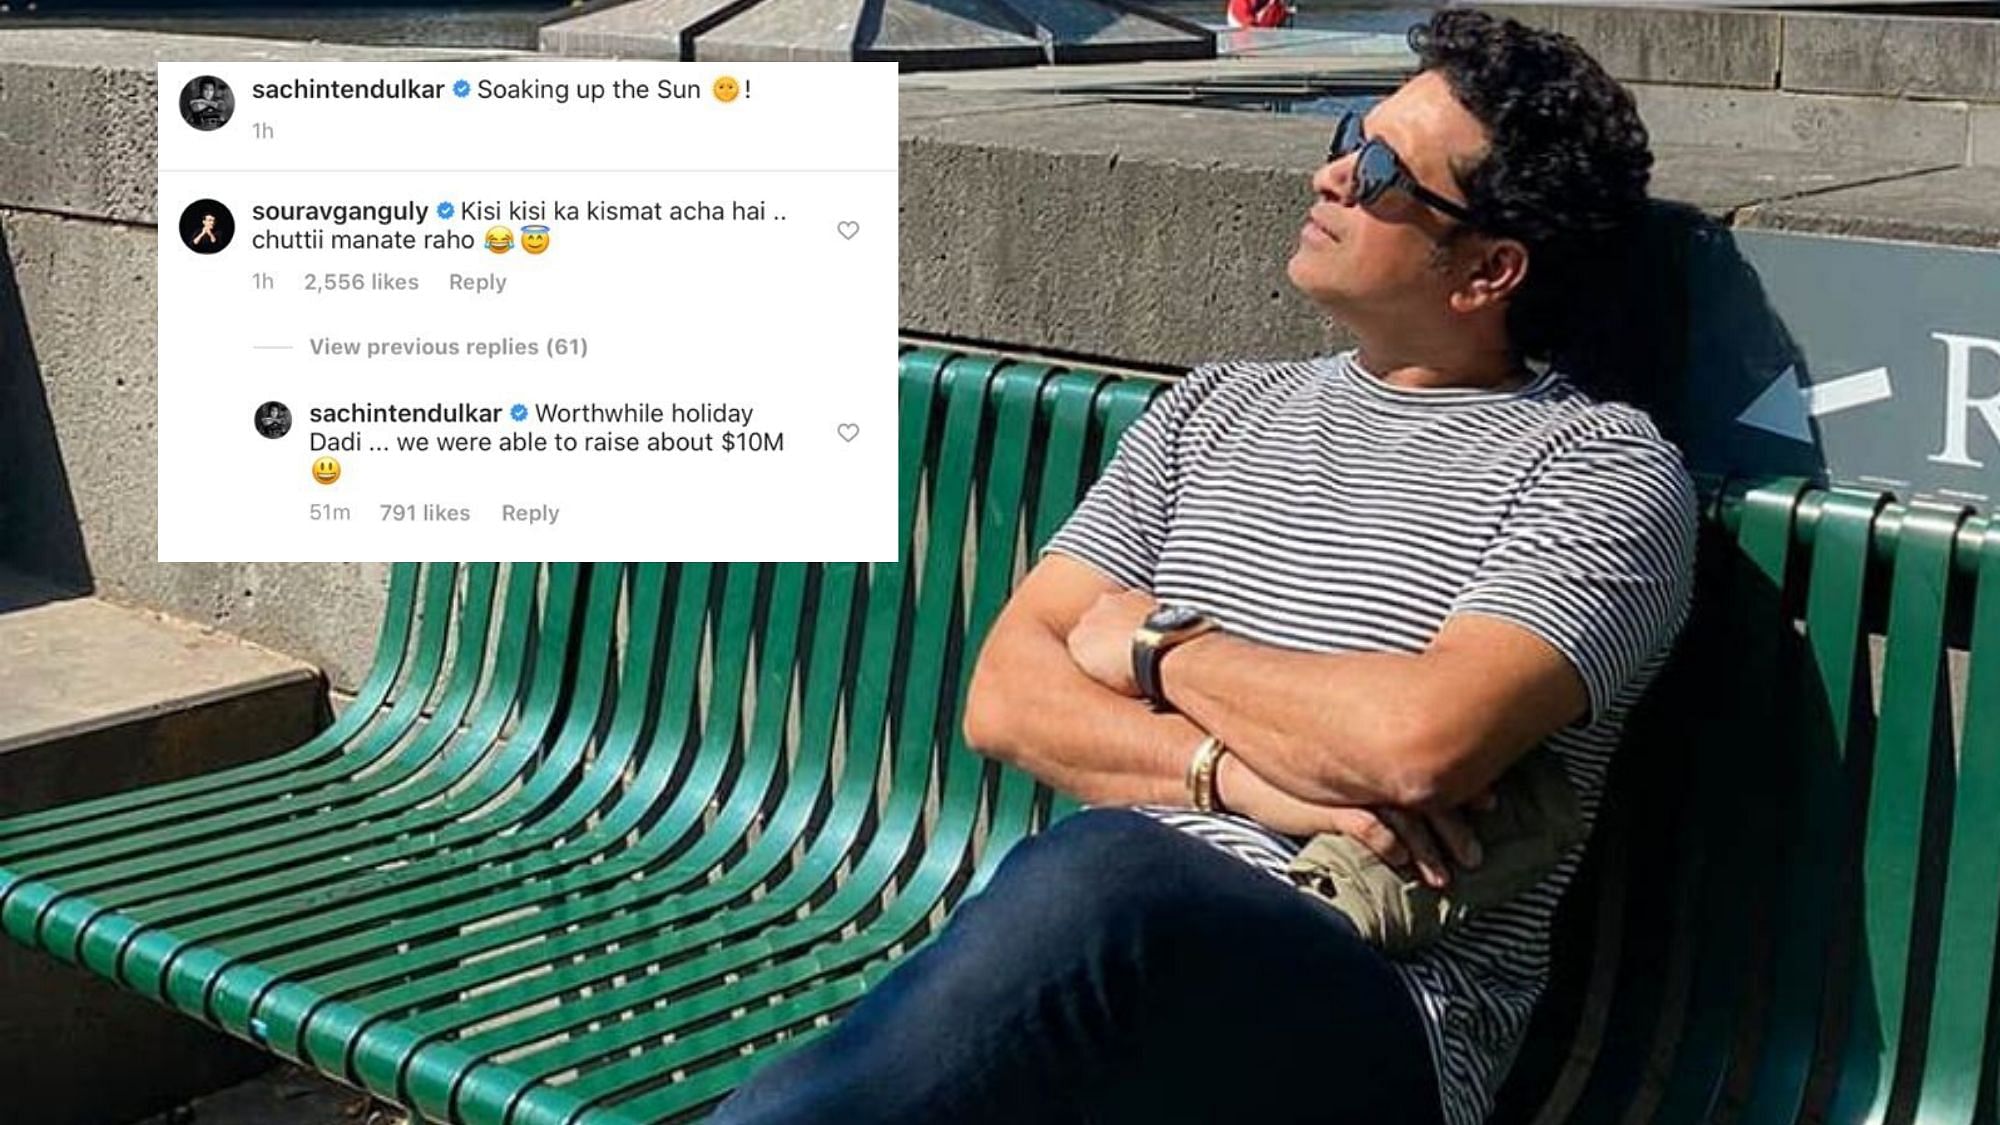 Tendulkar on Thursday took to Instagram to post a picture from Southbank in Melbourne where he was seen “Soaking up the Sun.”